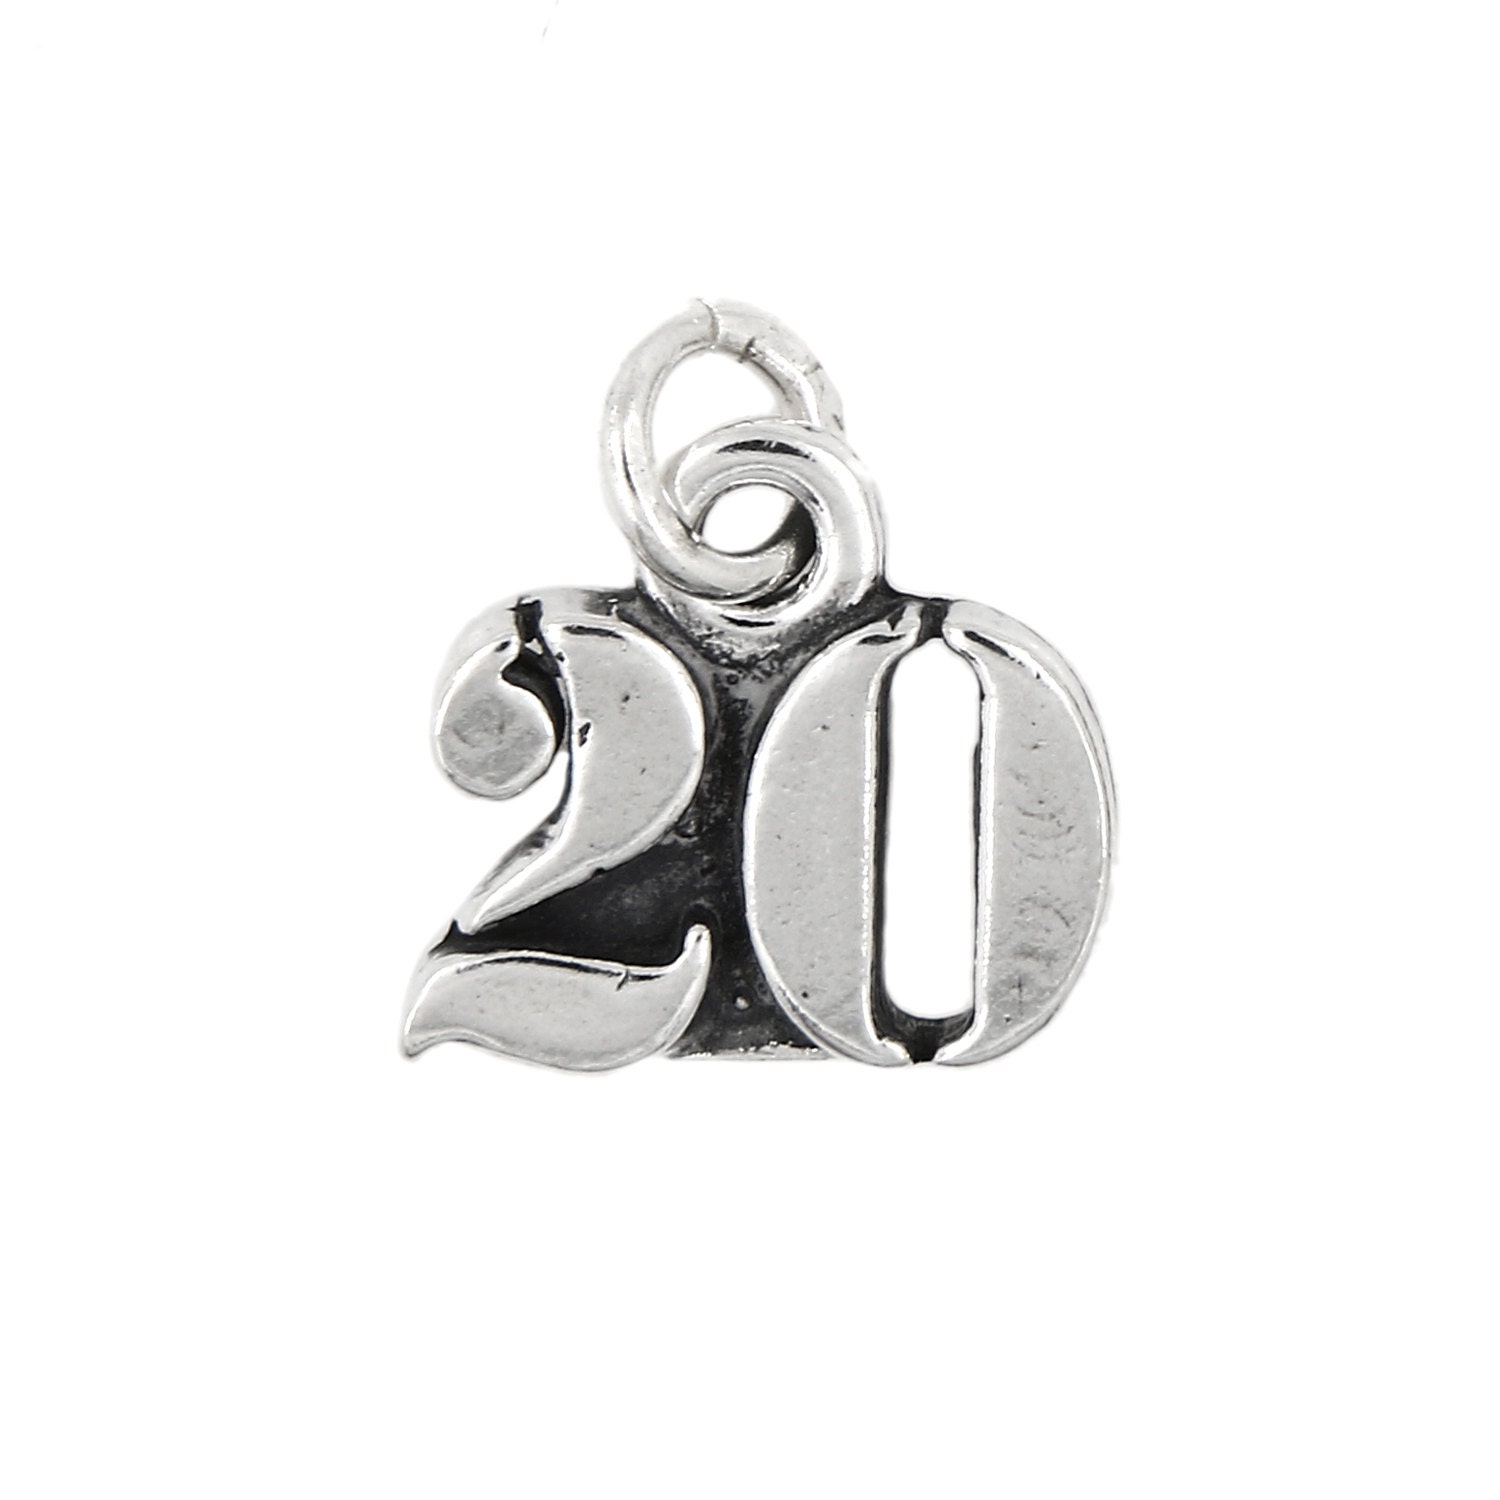 BULK 20 Number 100 Silver Tone Charms SC5731 